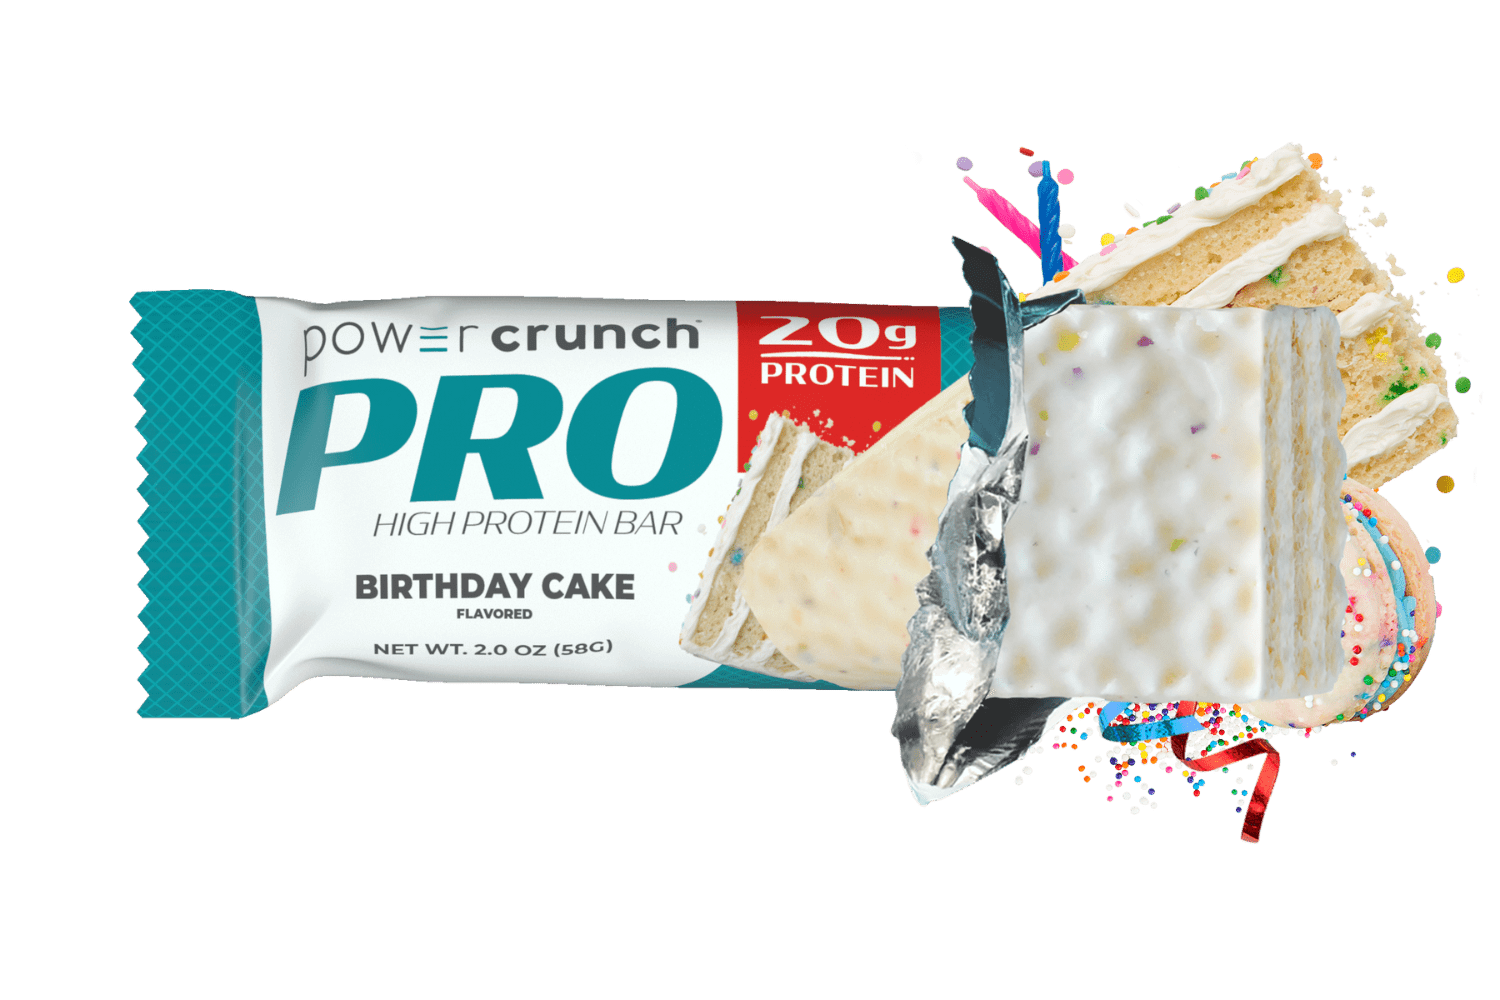 Power Crunch PRO Birthday Cake 20g protein bars pictured with Birthday Cake flavor explosion